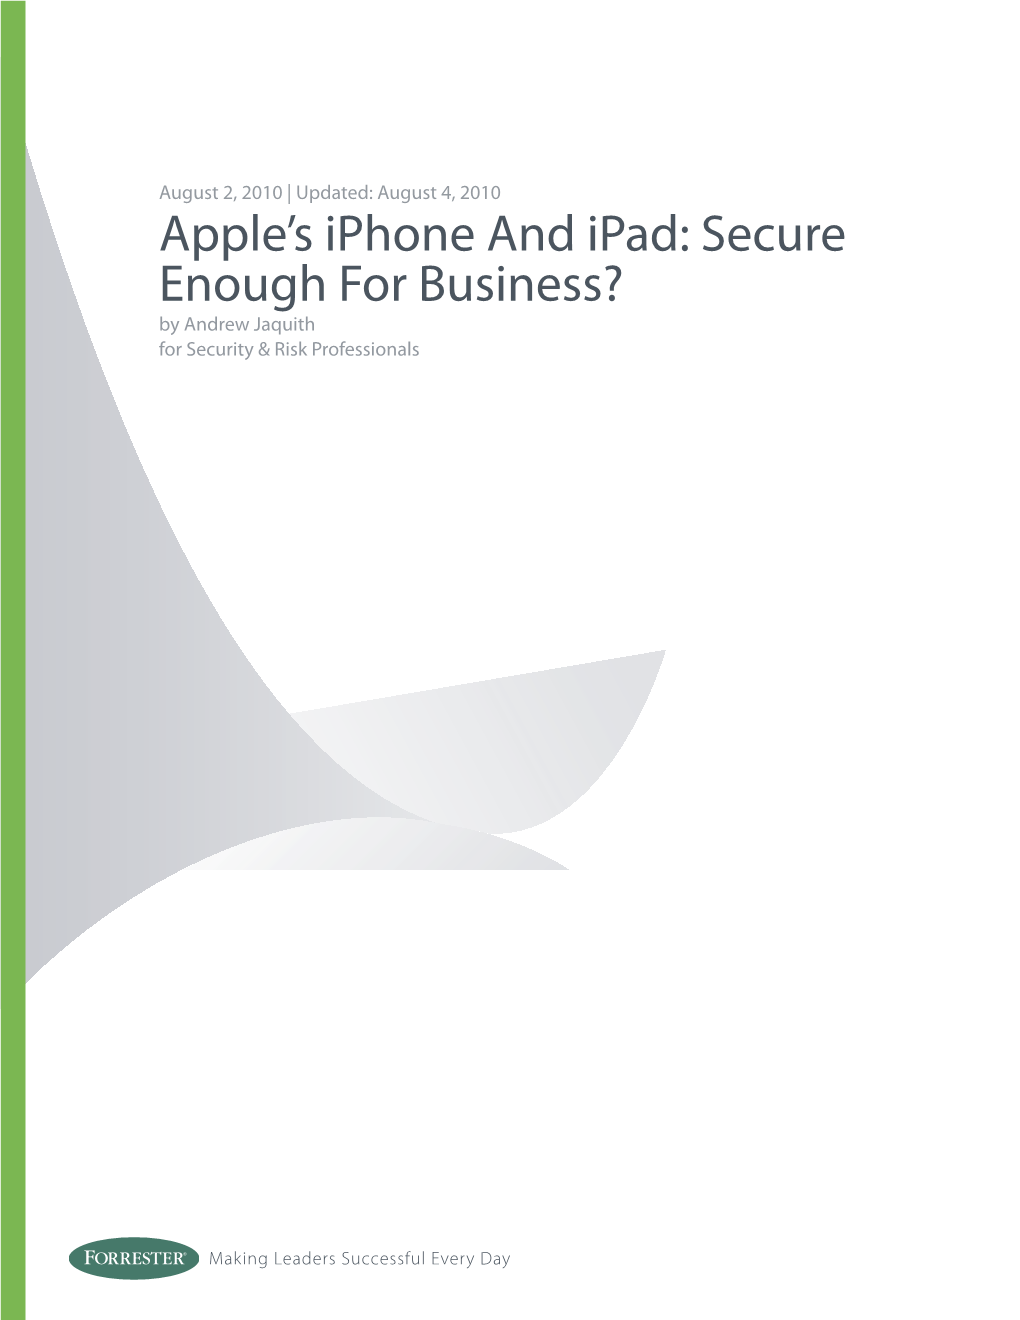 Apple's Iphone and Ipad: Secure Enough for Business?